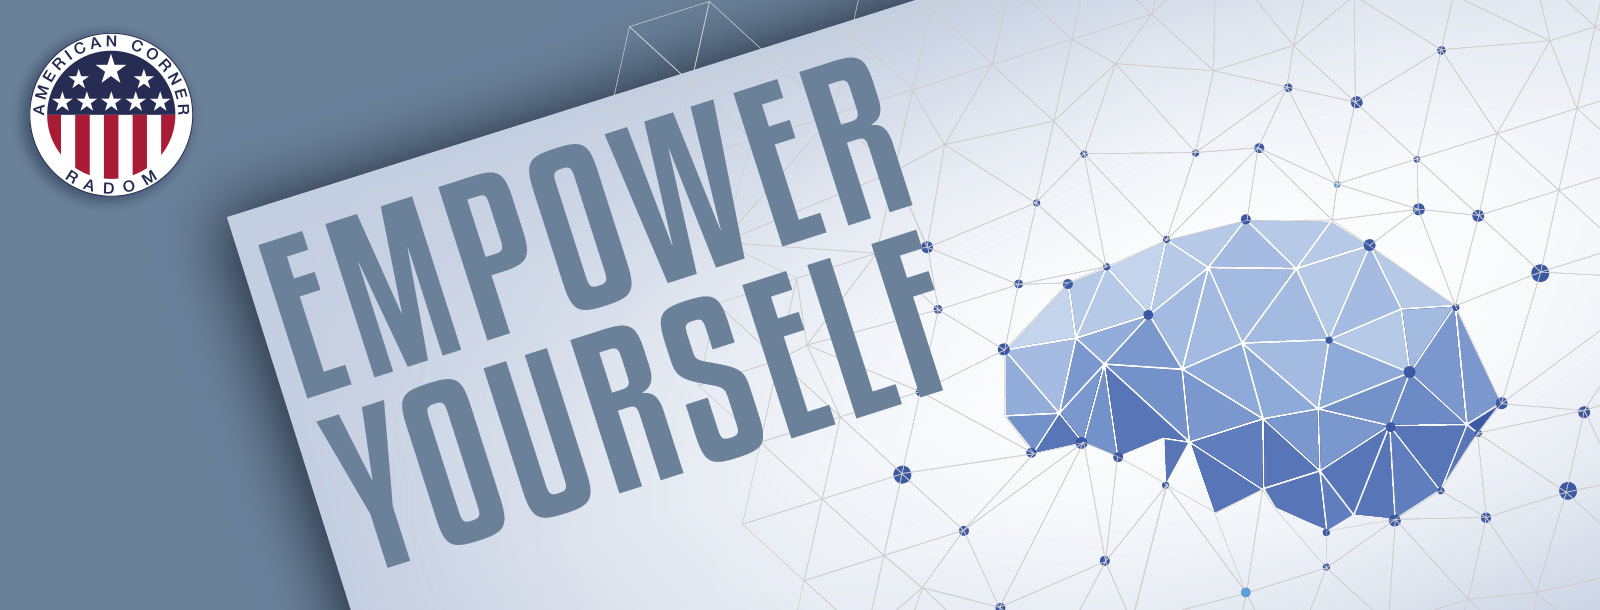 EMPOWER YOURSELF - coaching